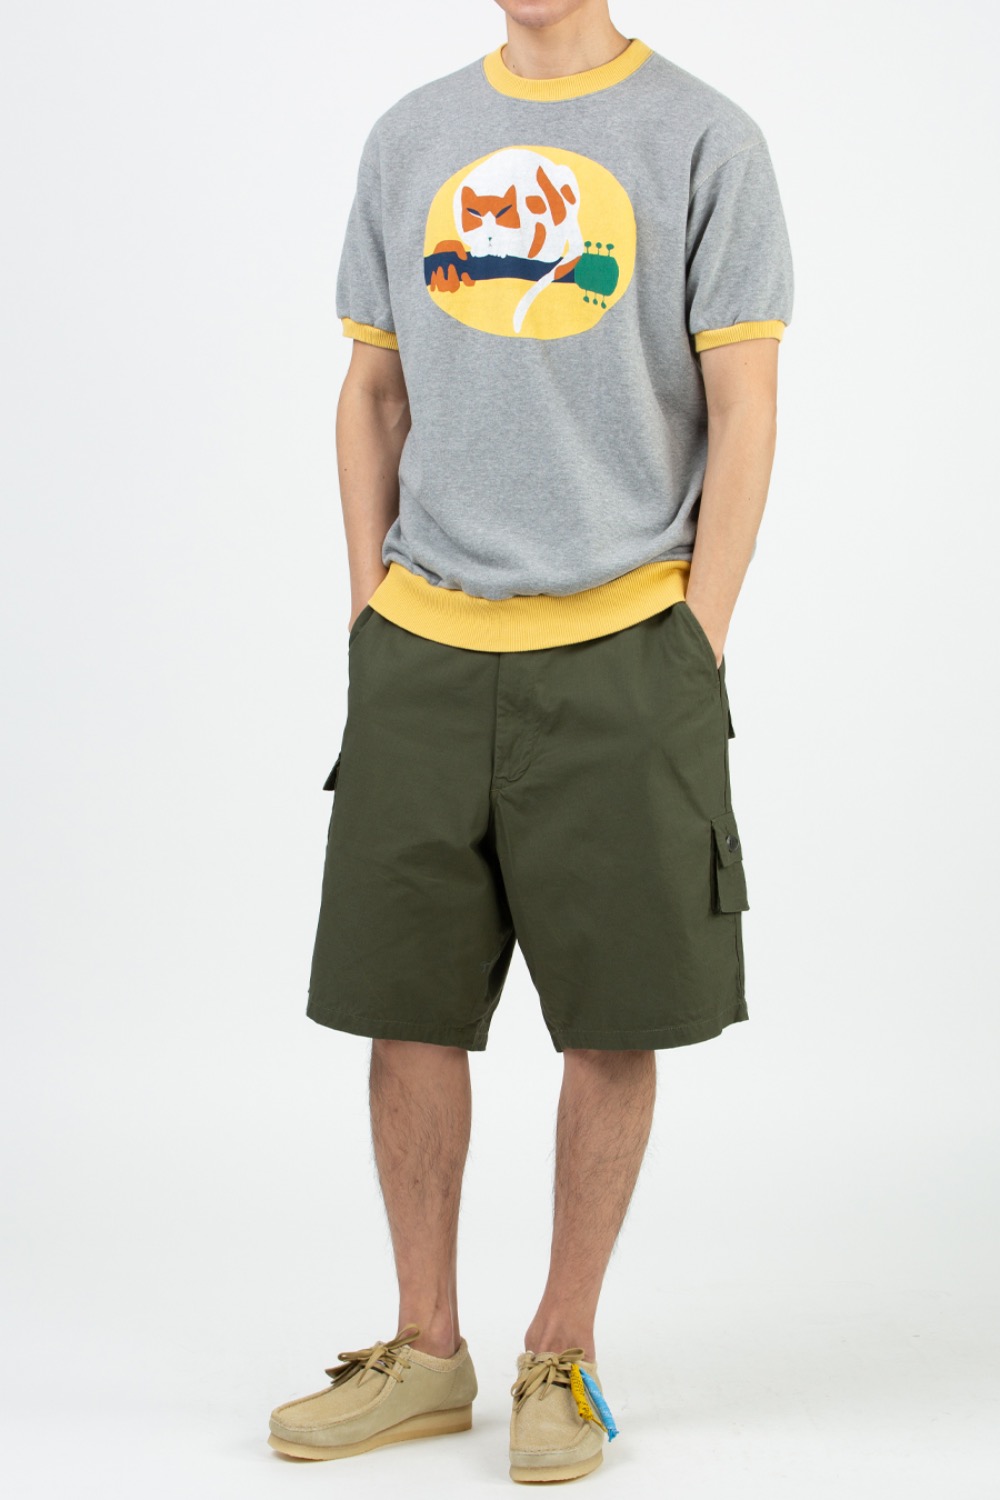 ECO SWT KNIT RINGER S/S SWT(FAT CAT ON LEGEND LIVE) GREY/YELLOW